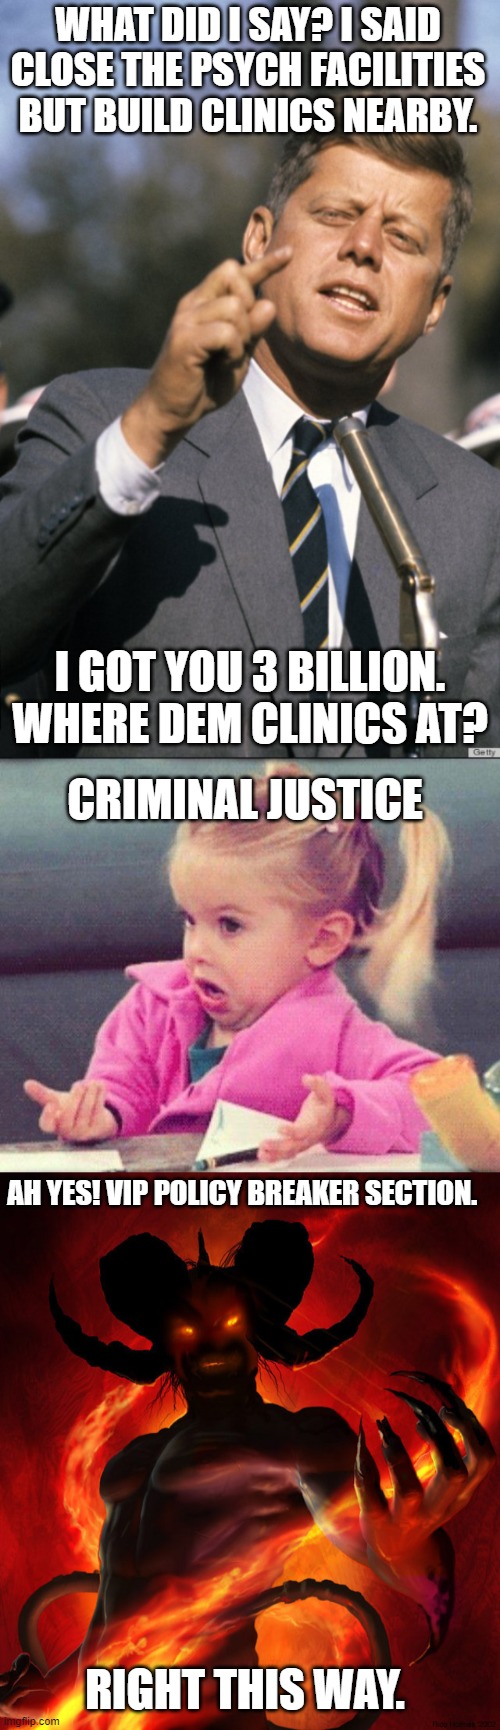 Mental illness neglect |  WHAT DID I SAY? I SAID CLOSE THE PSYCH FACILITIES BUT BUILD CLINICS NEARBY. I GOT YOU 3 BILLION. WHERE DEM CLINICS AT? CRIMINAL JUSTICE; AH YES! VIP POLICY BREAKER SECTION. RIGHT THIS WAY. | image tagged in john f kennedy,i dont know girl,the devil | made w/ Imgflip meme maker